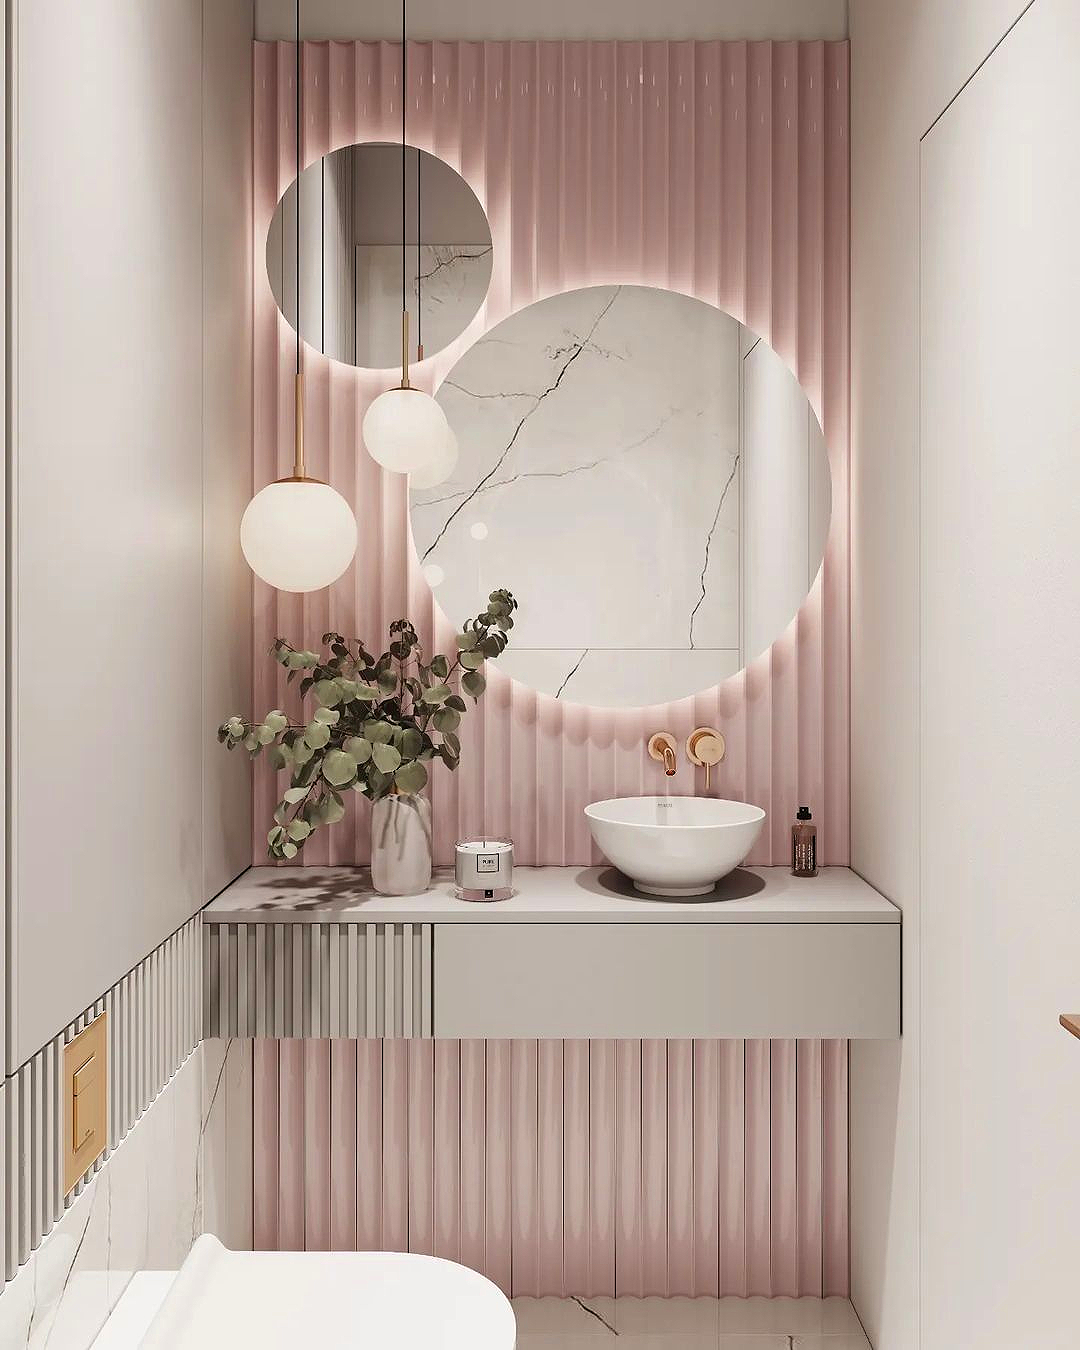 Project by Moje Projekty - 10 Pink Bathroom Design Ideas That Will Leave You Astonished home inspiration ideas